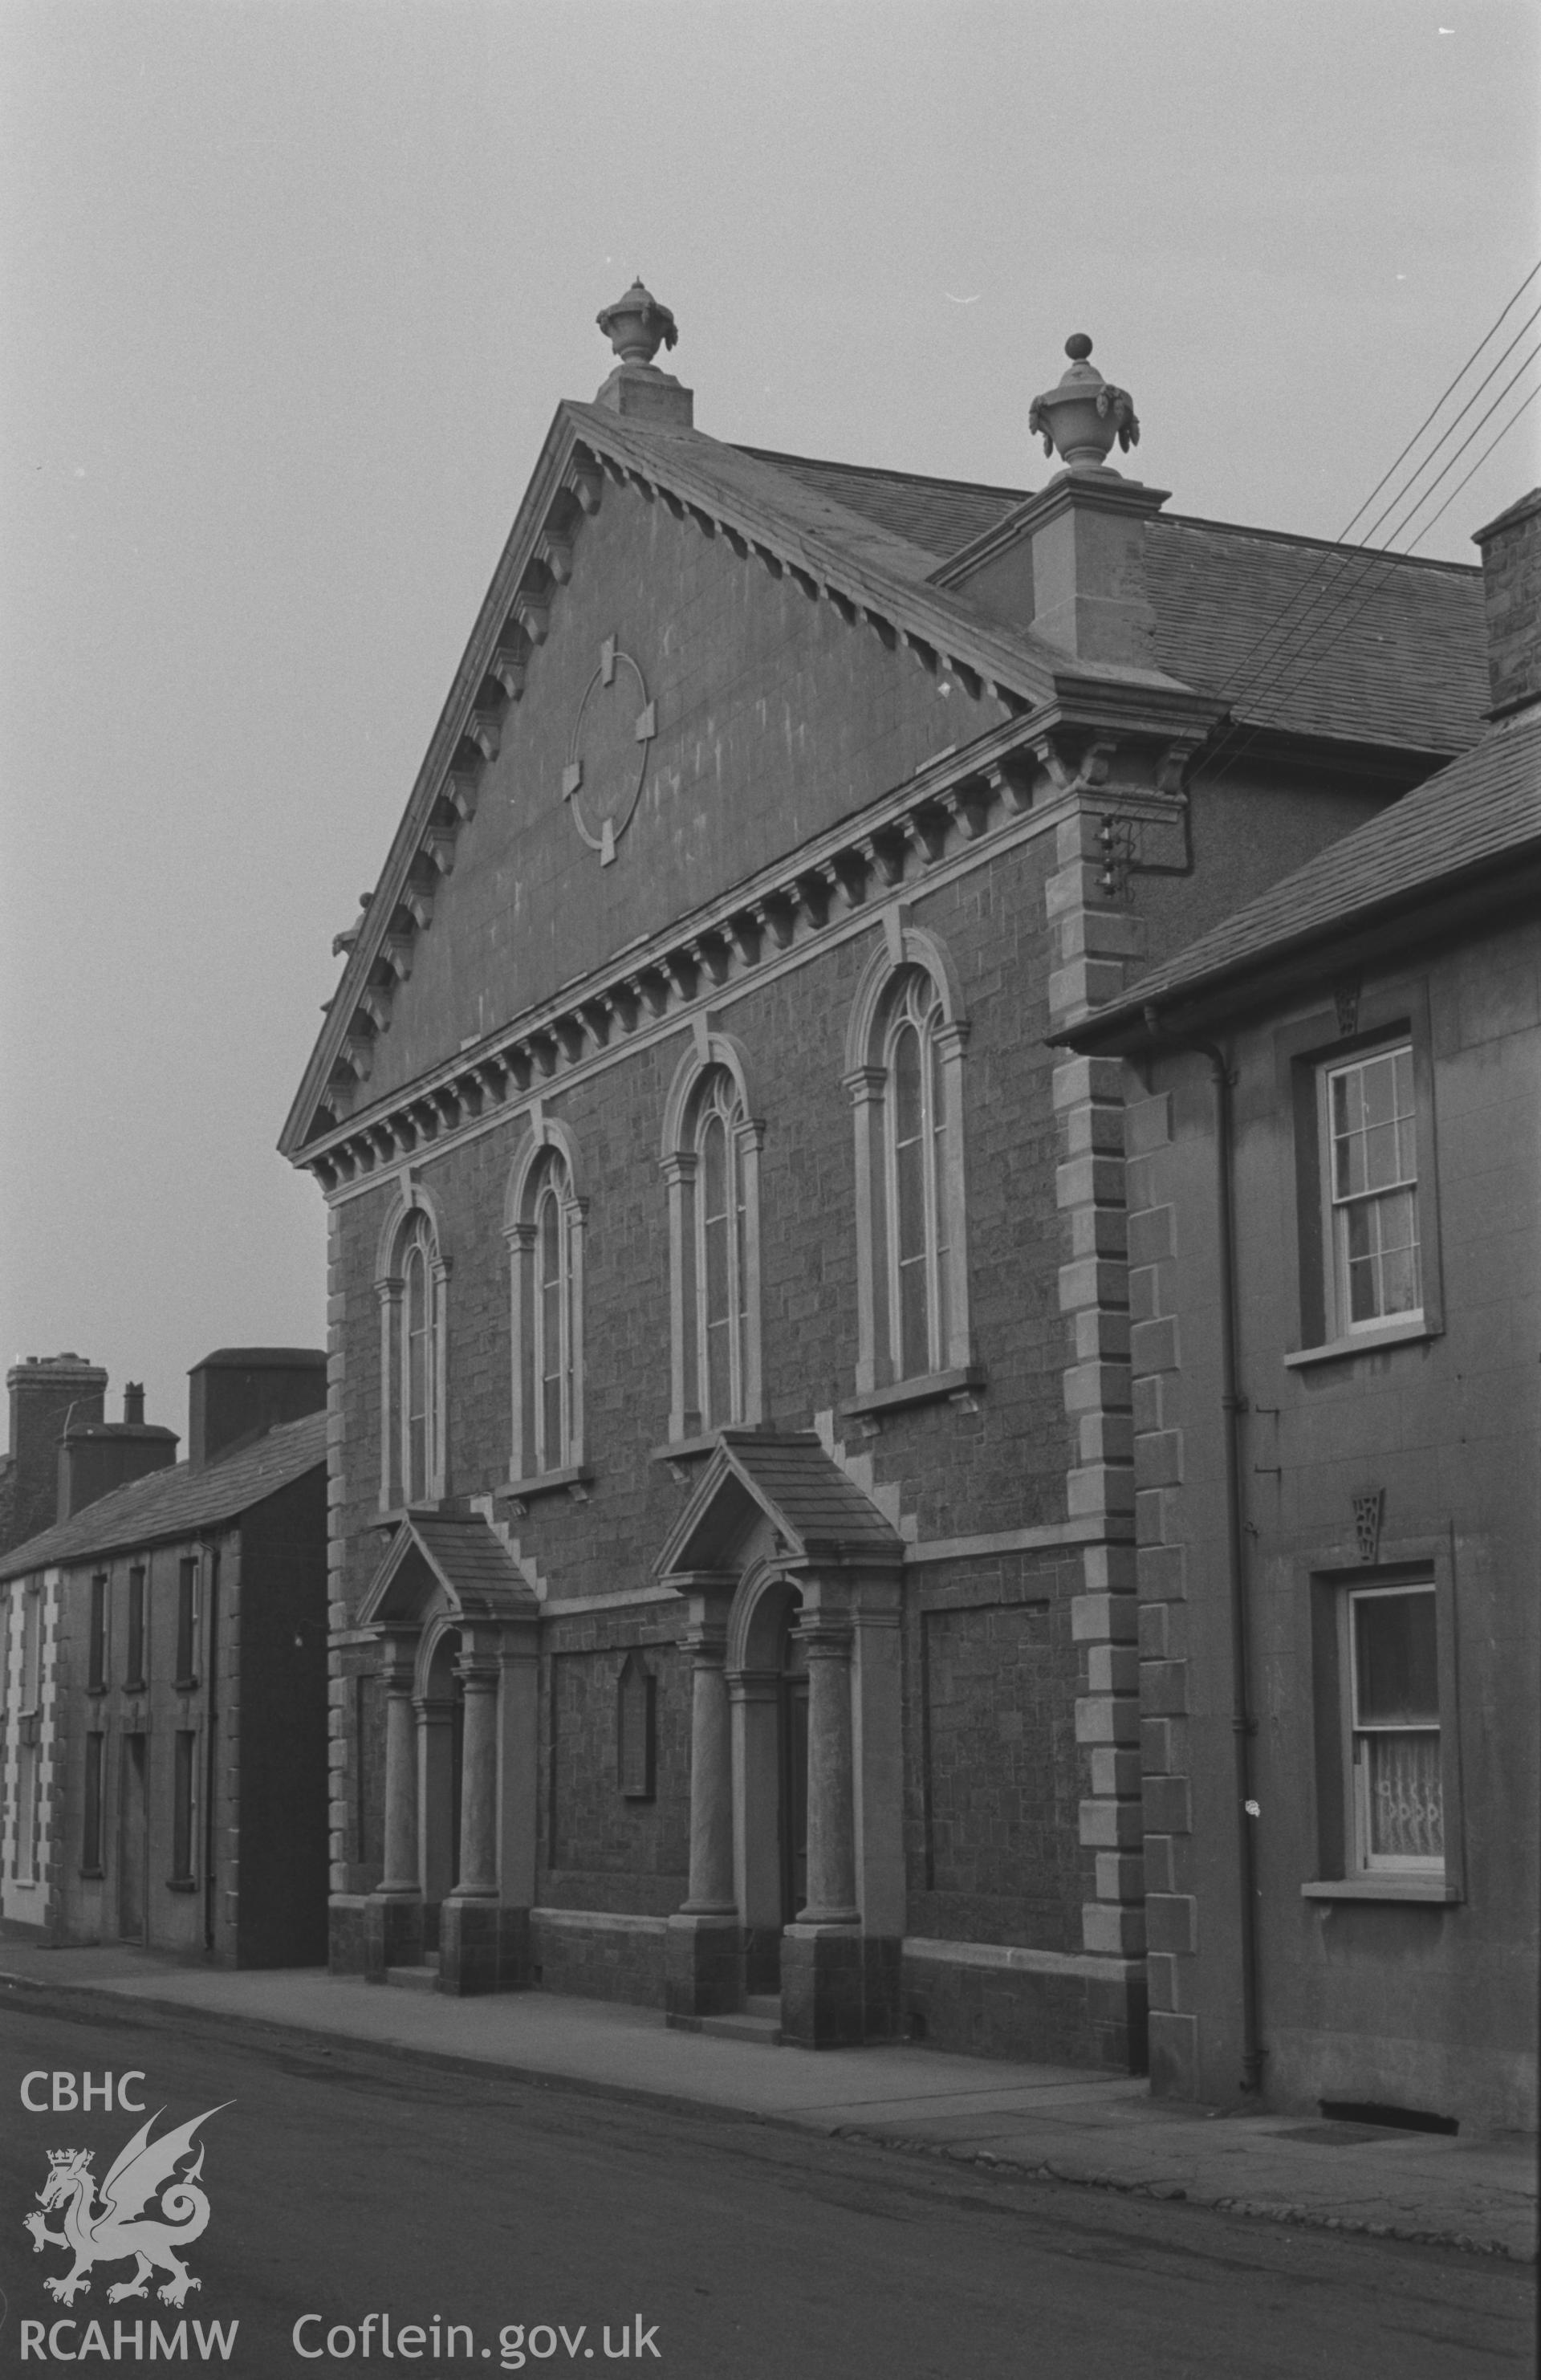 Black and White photograph showing Tabernacl chapel, Aberaeron. Photographed by Arthur Chater, February 1963. Taken from grid reference SN 4572 6298, looking north.